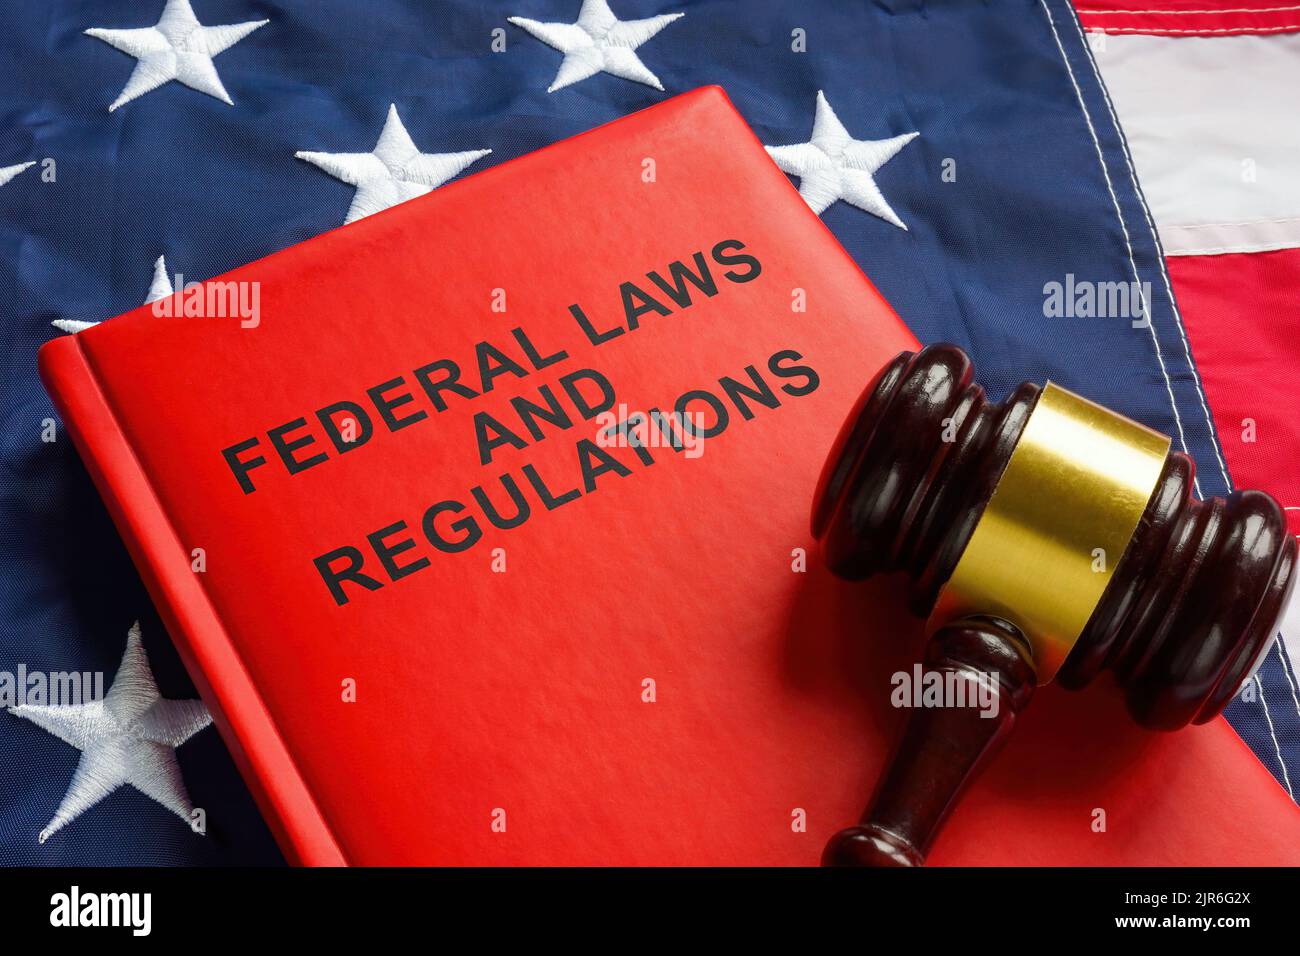 Federal laws and regulations book and gavel on the flag. Stock Photo